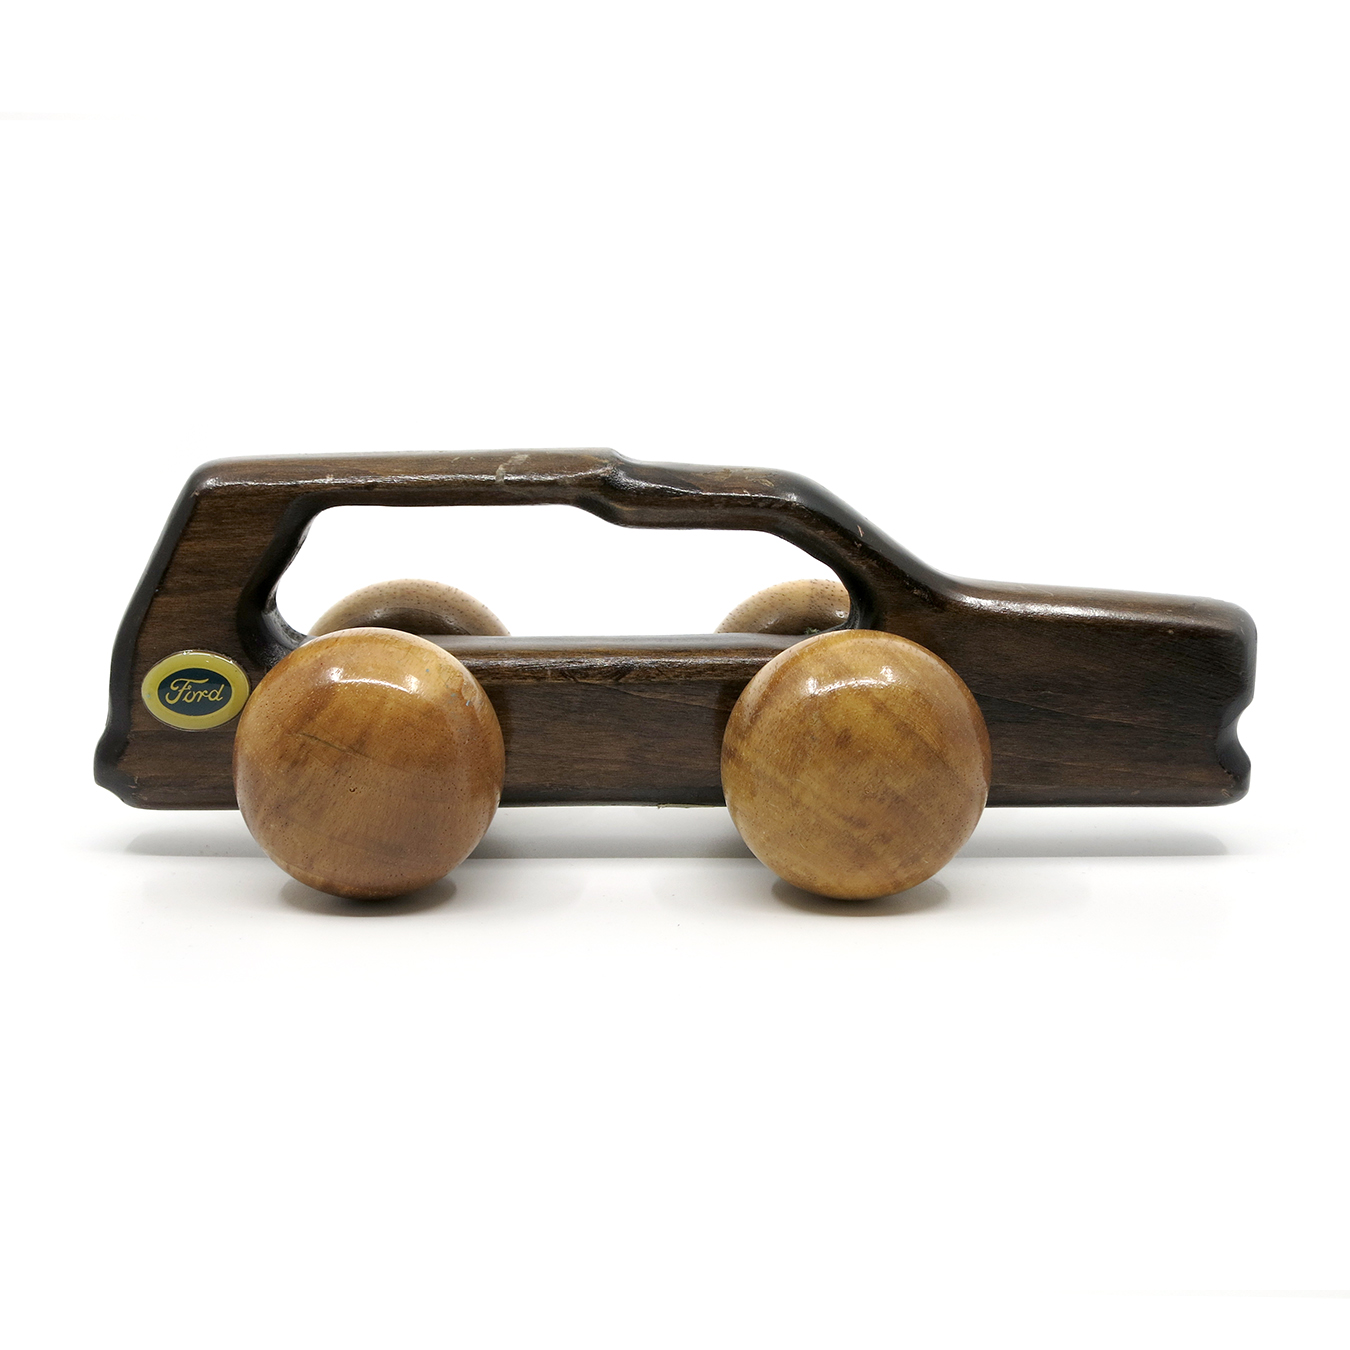 Ford Bronco Wooden Massage Tool (c. 1970s)